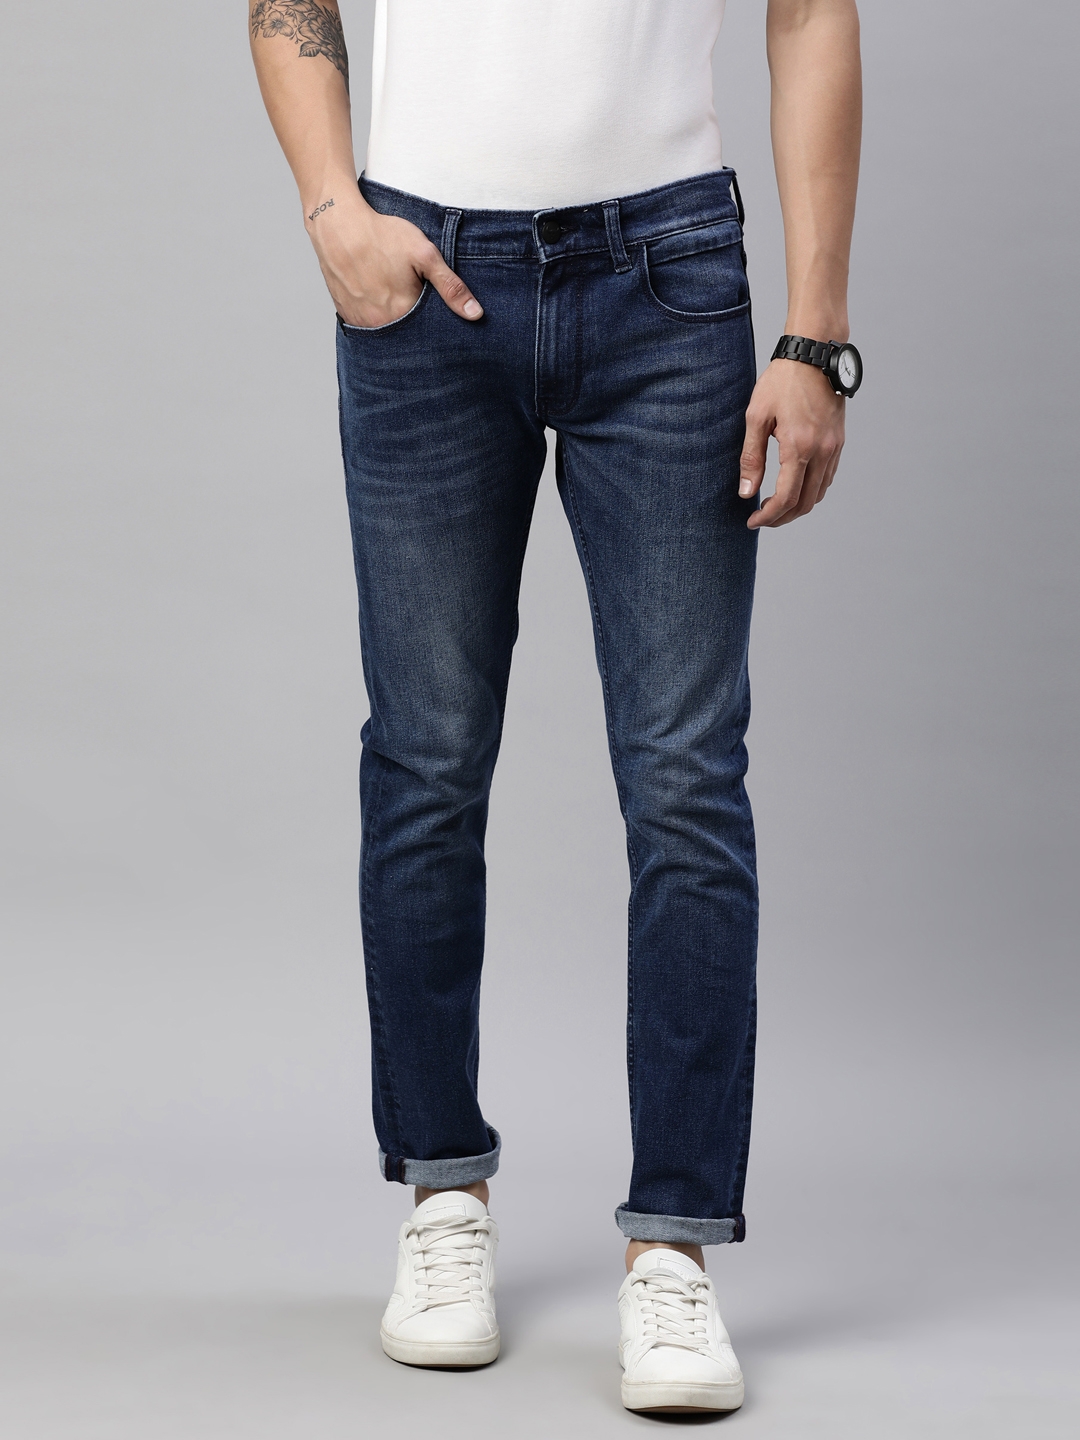 American Bull Mens Denim Jeans With 5 Pockets